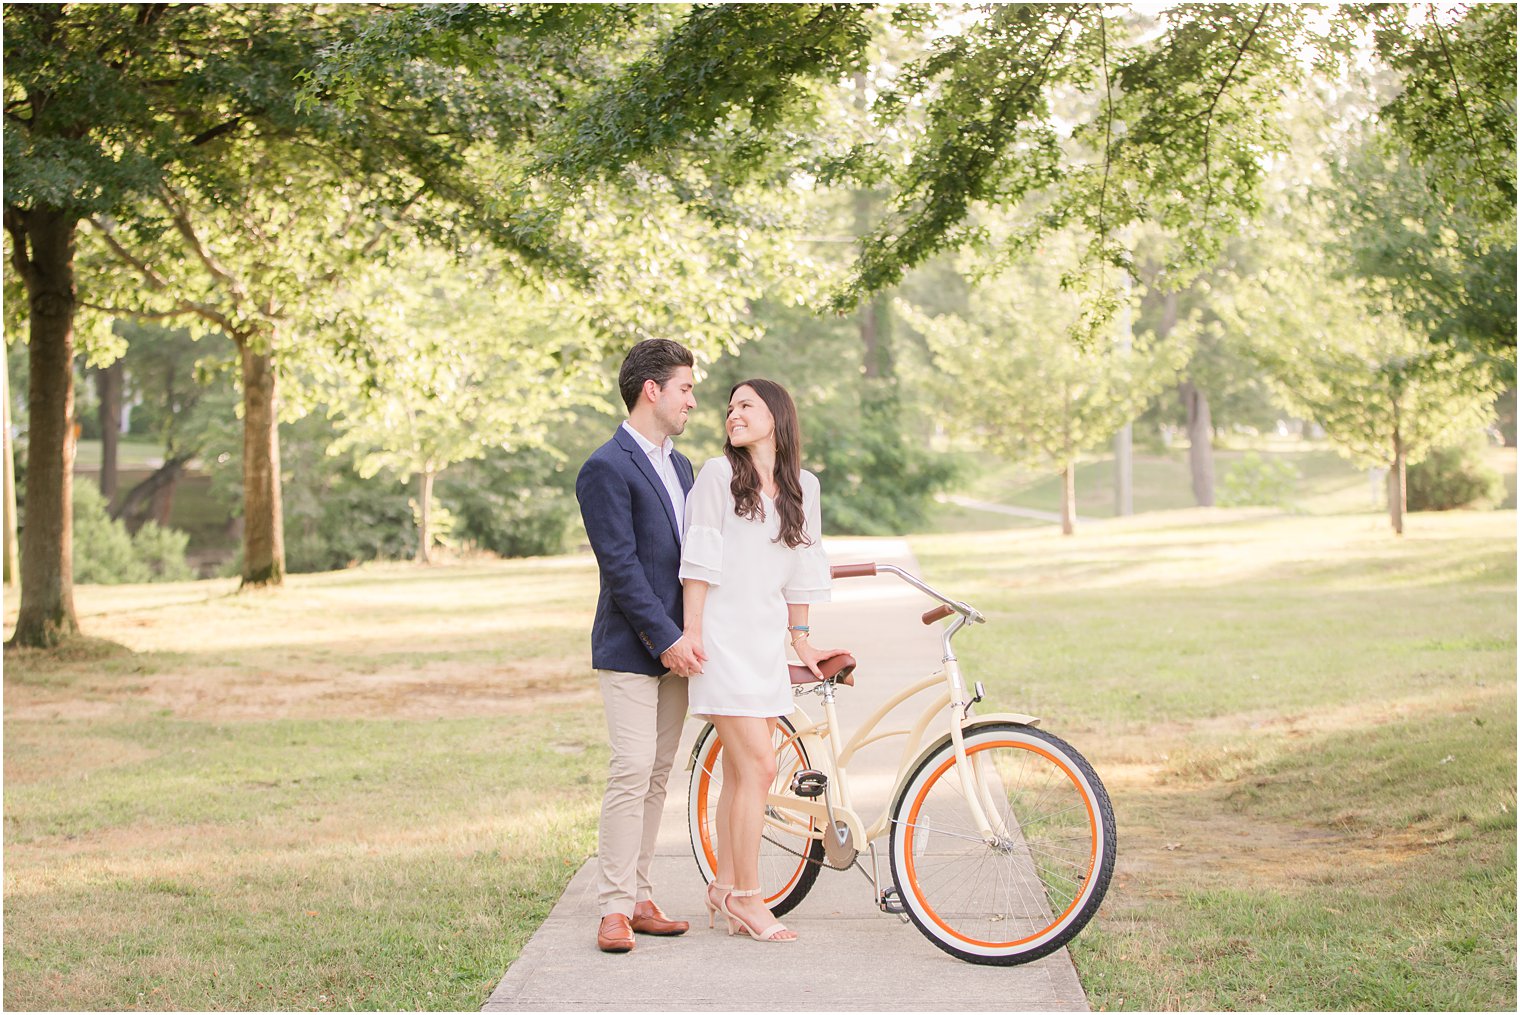 bride in white dress poses with groom in navy jacket by bike